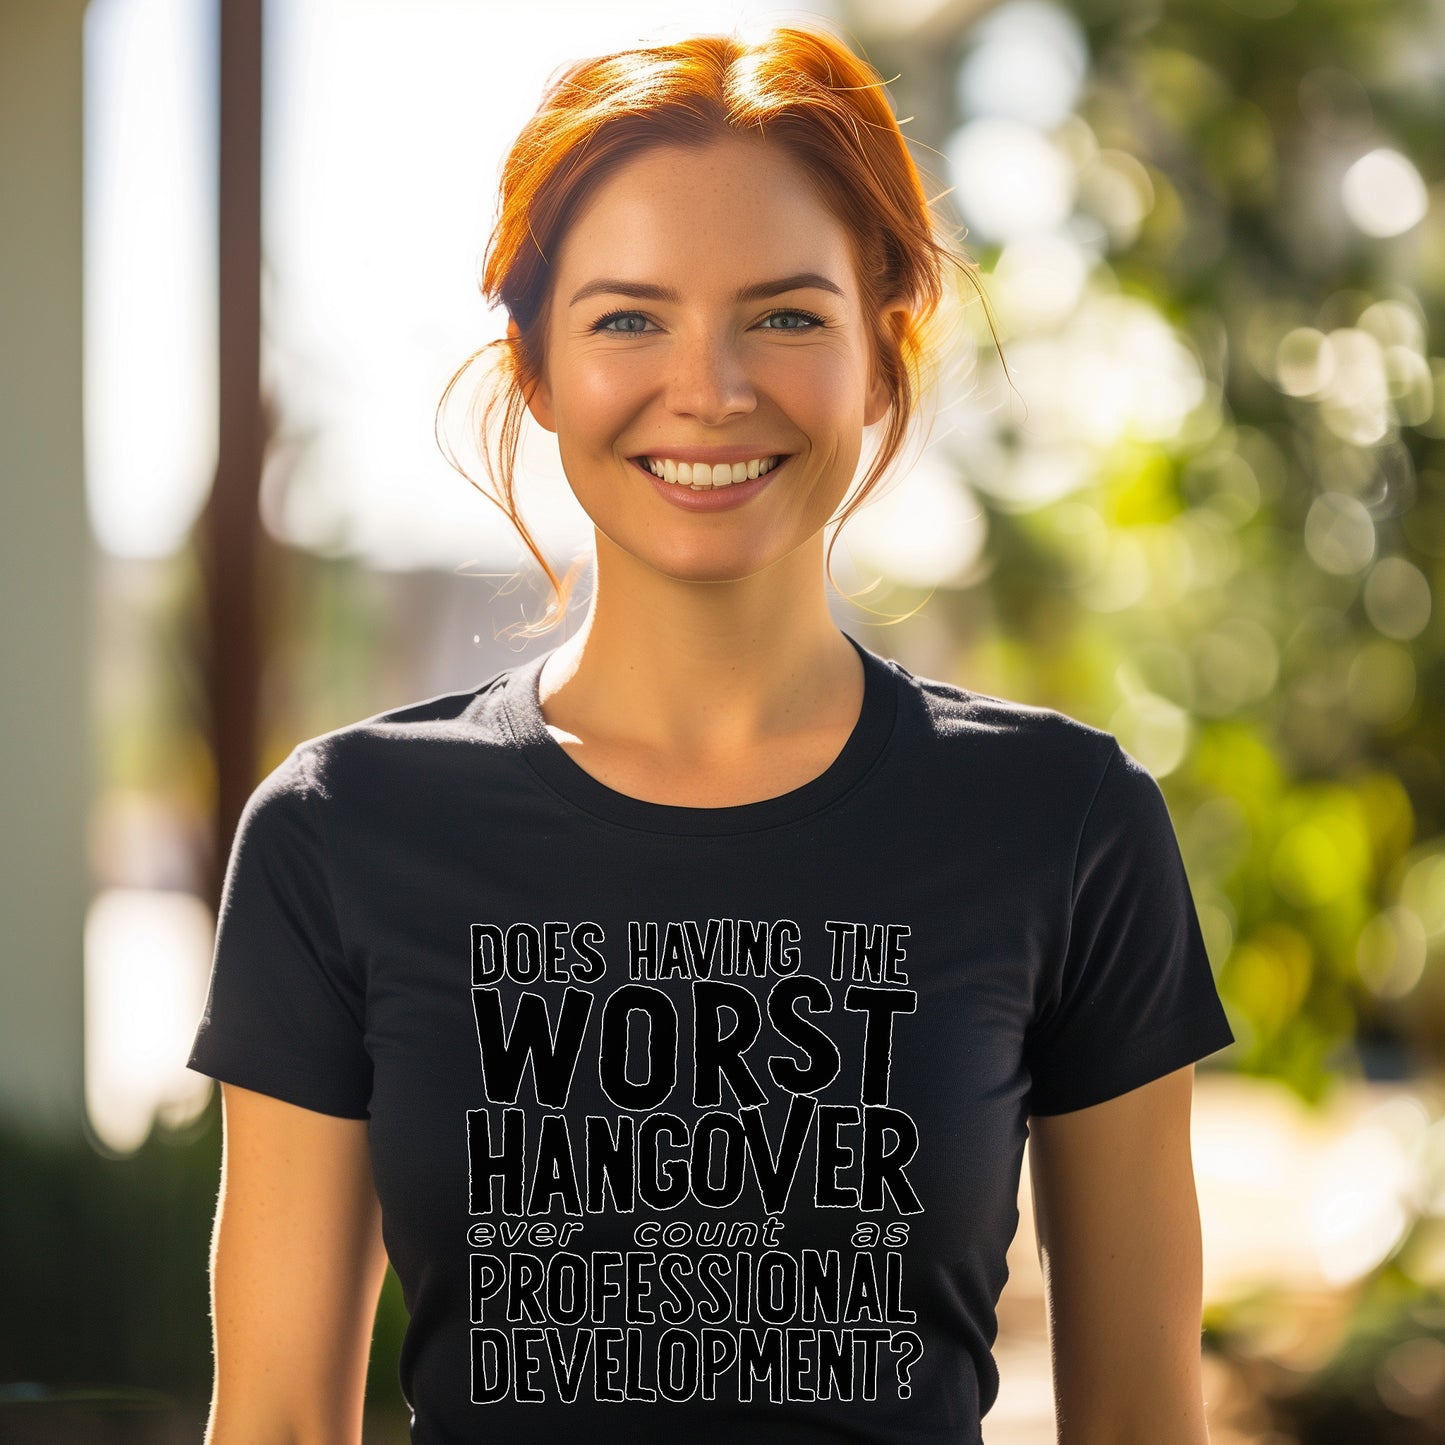 Funny Worst Hangover Ever T-Shirt , Worst Hangover Ever TShirt, Funny Worst Hangover Ever Shirt, Funny Hangover Shirt, Funny Worst Hangover